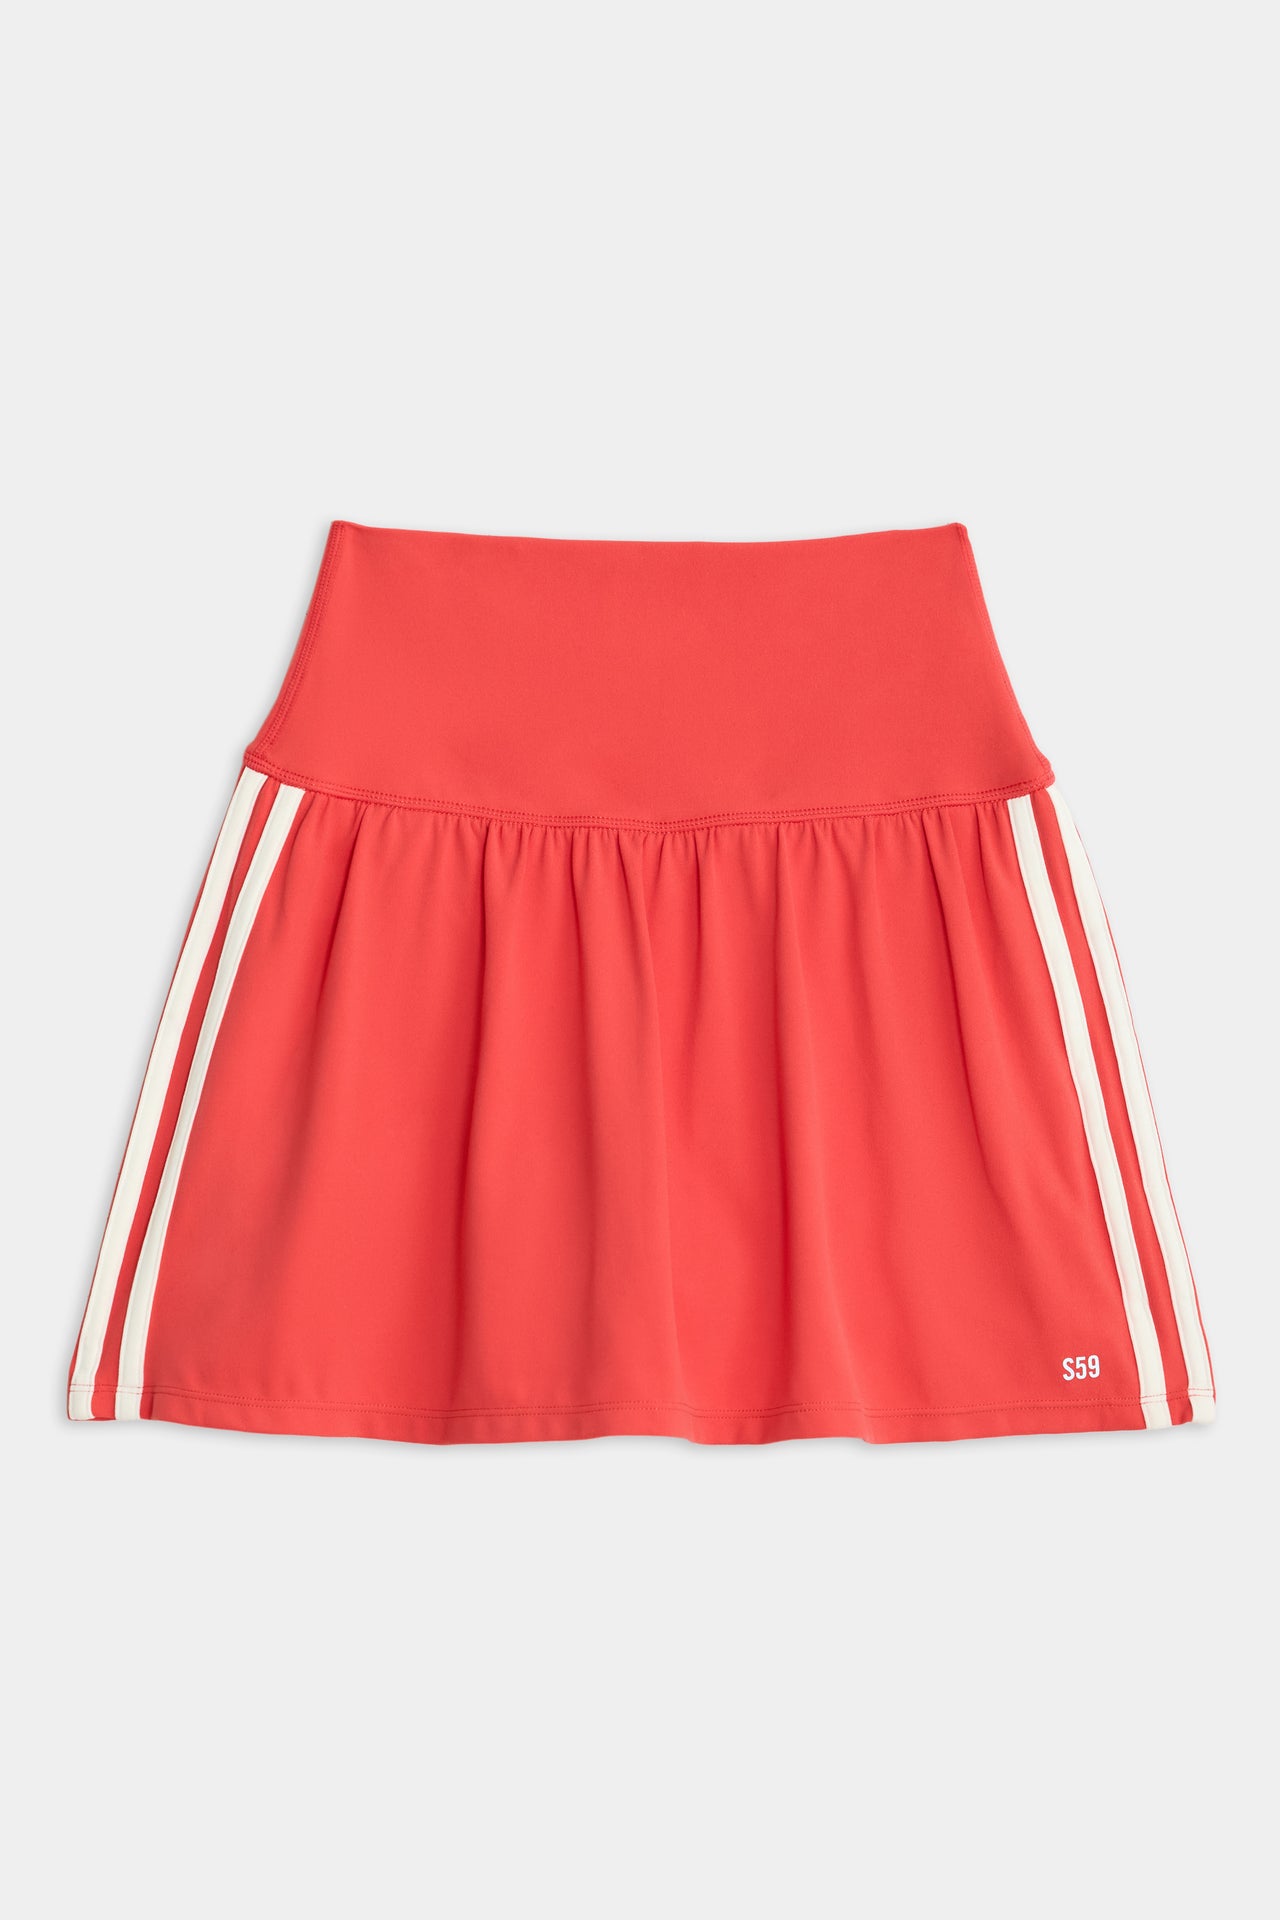 Ella Airweight Skort - Melon/White athletic skort with white side stripes, made of spandex and nylon by SPLITS59.